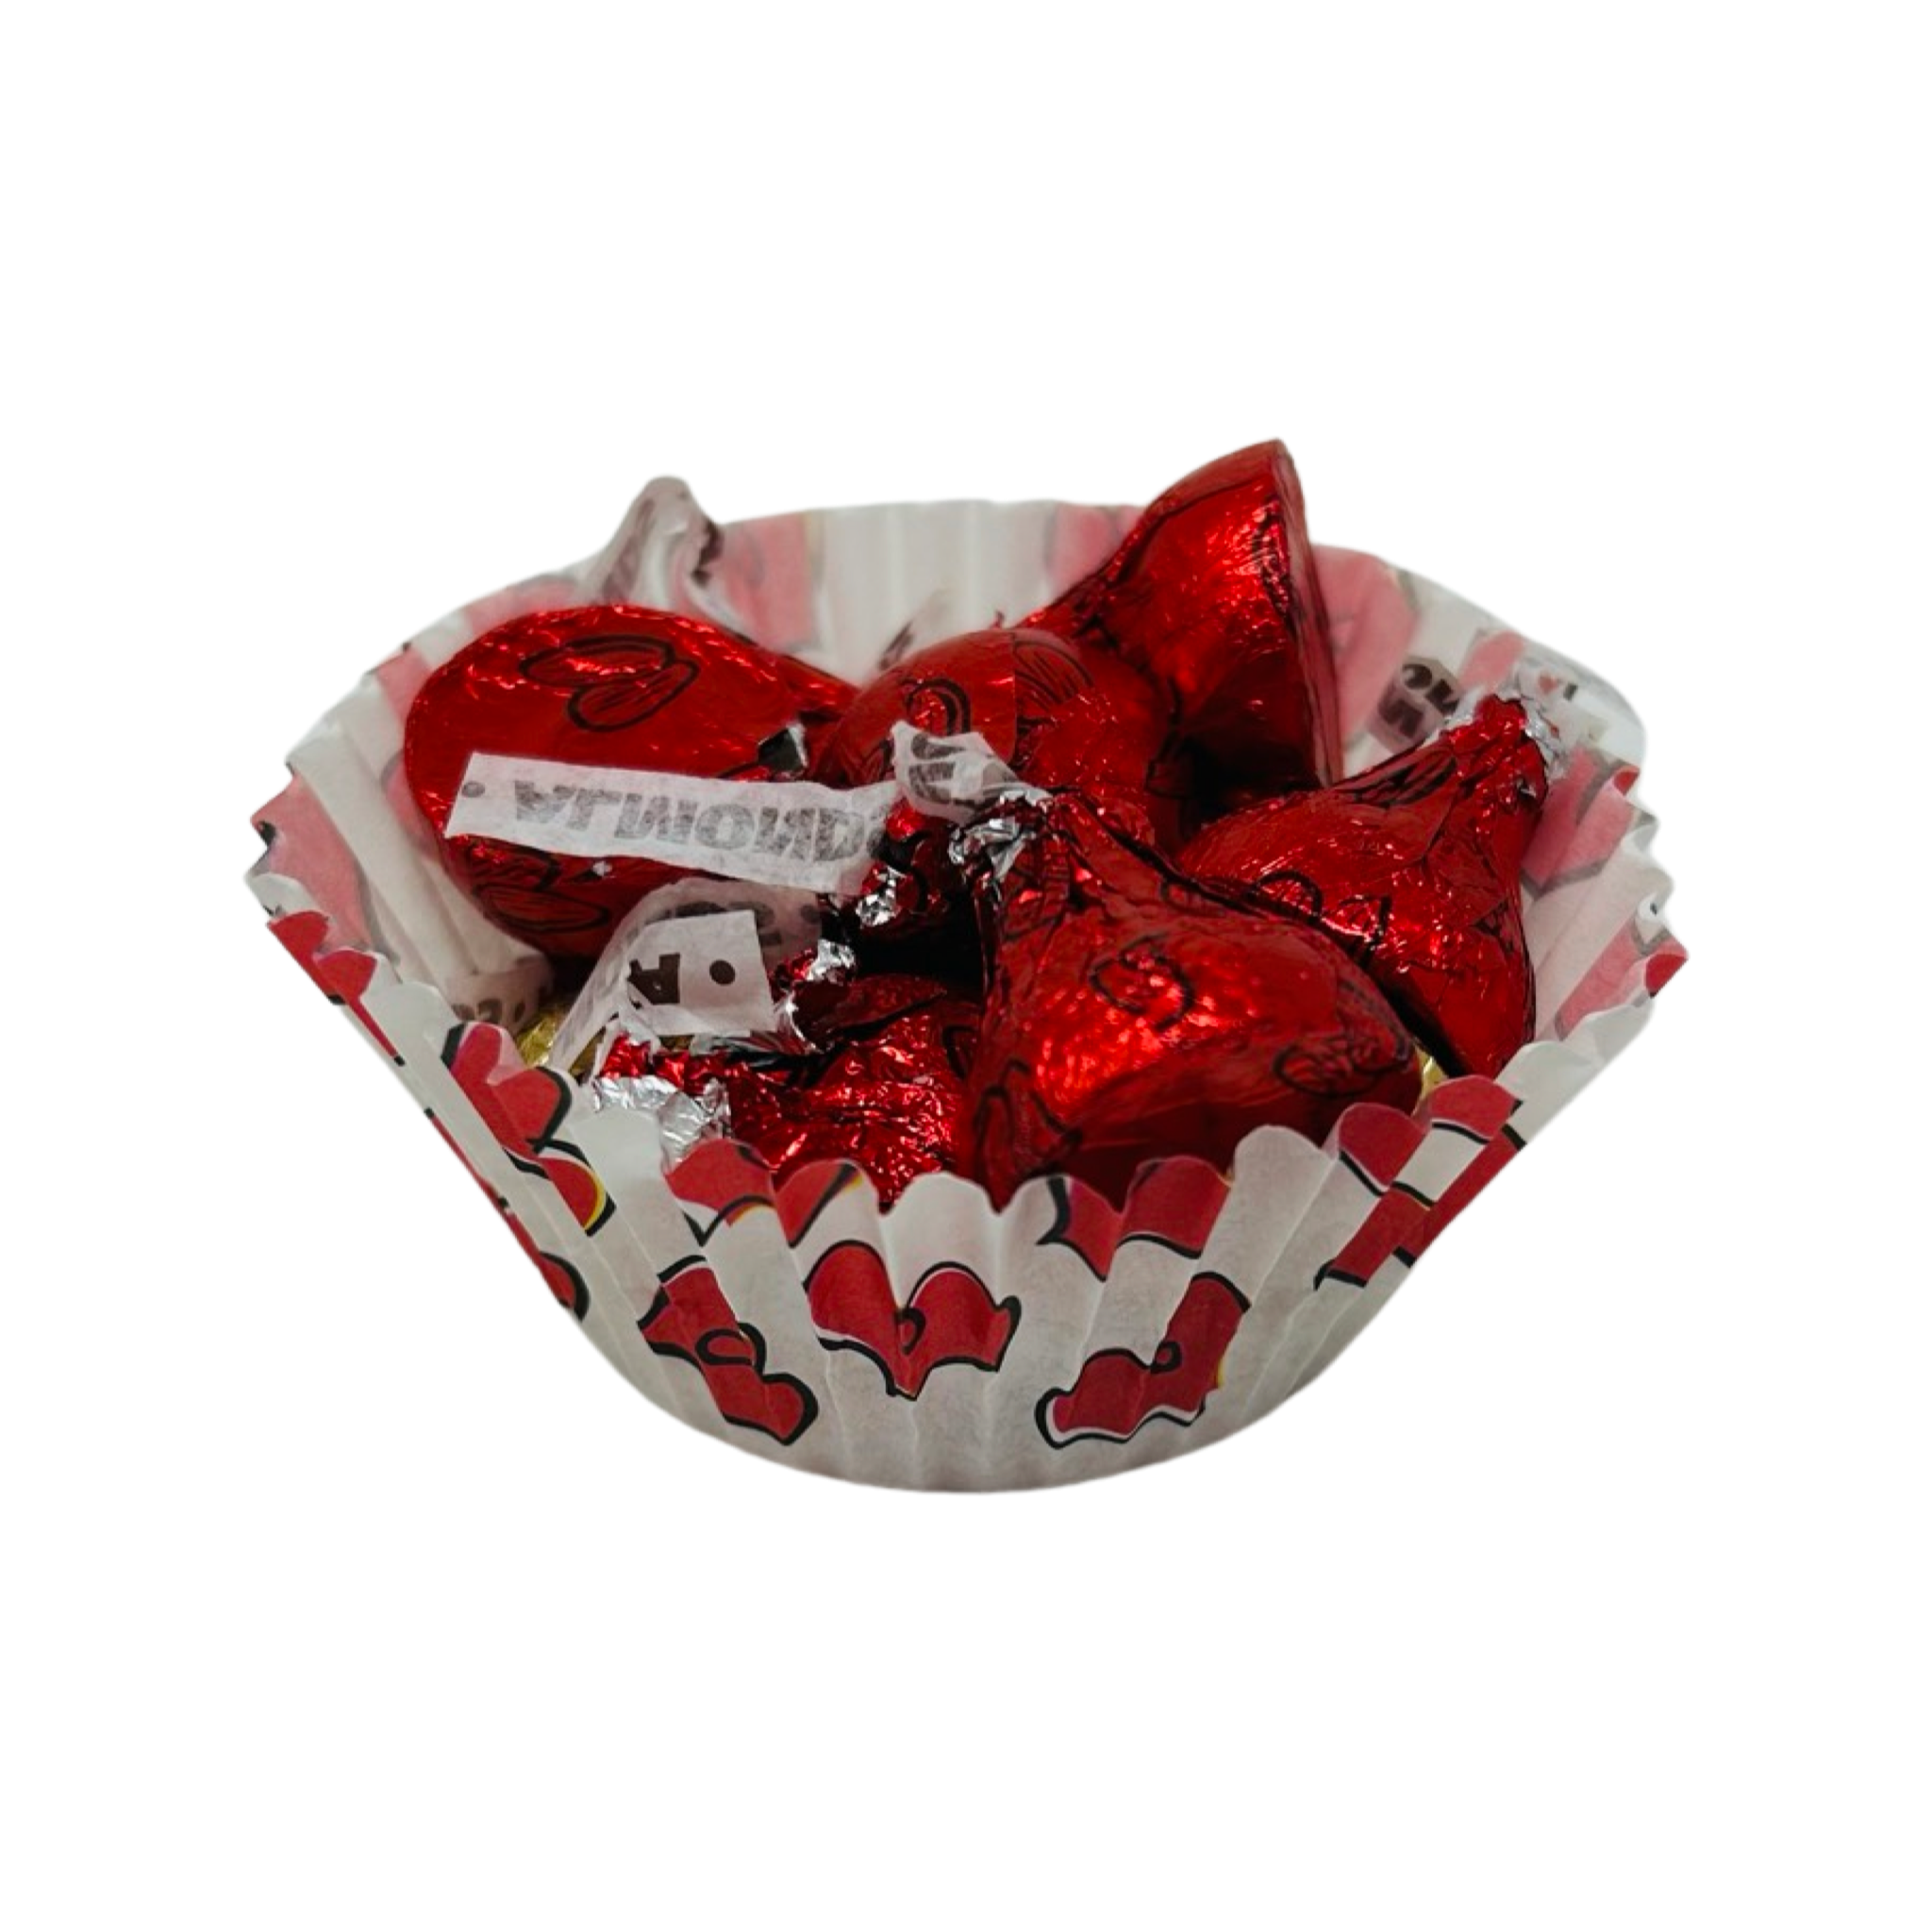 White and Red Valentine’s Day Baking Supplies Cupcake Kit with Heart Picks